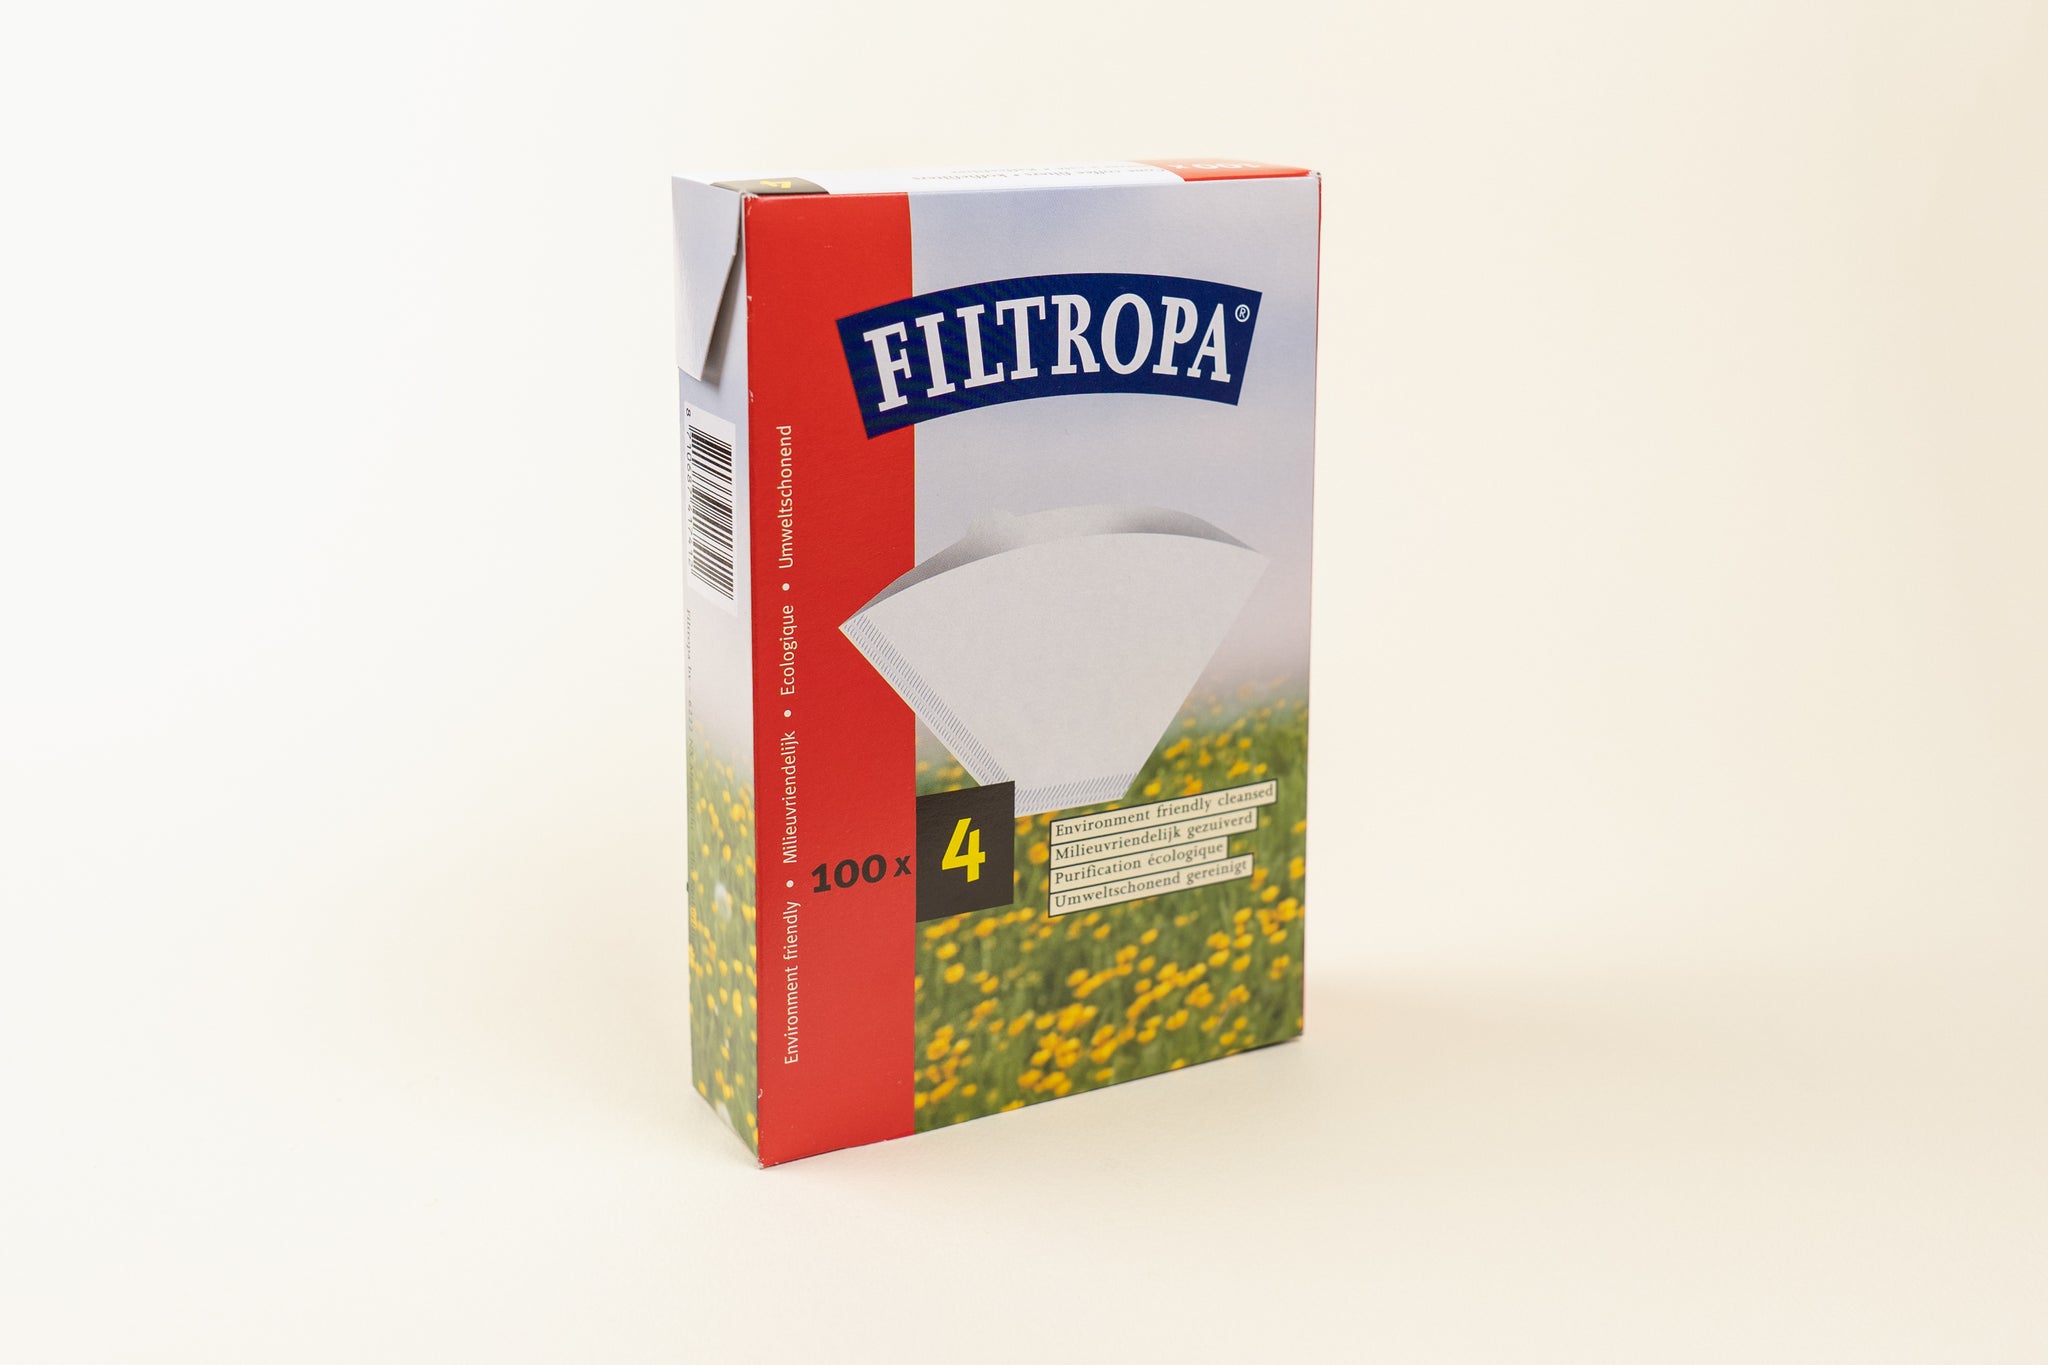 Filtropa - White 4 Cup Coffee Paper Filters (100 pcs)